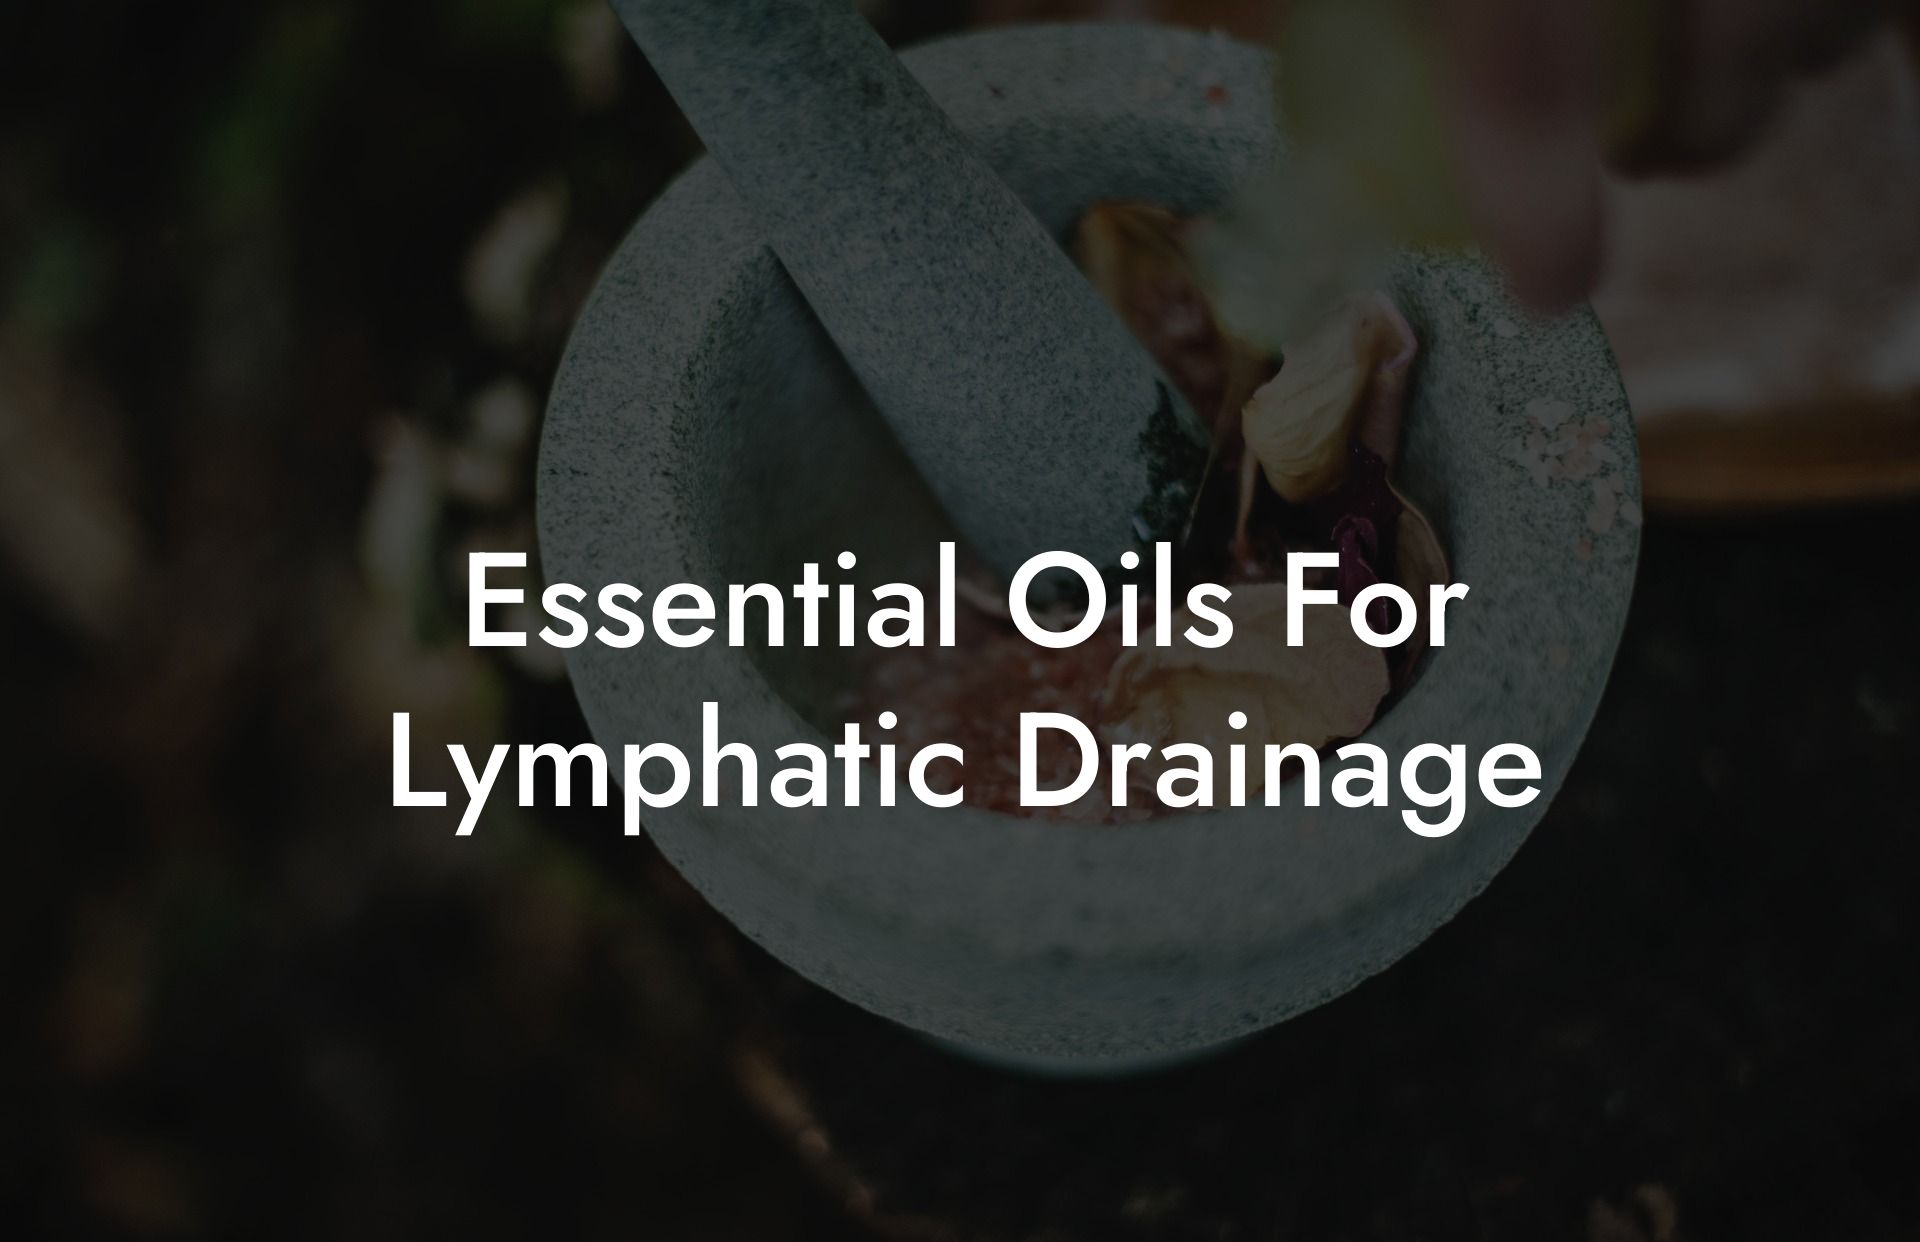 Essential Oils For Lymphatic Drainage